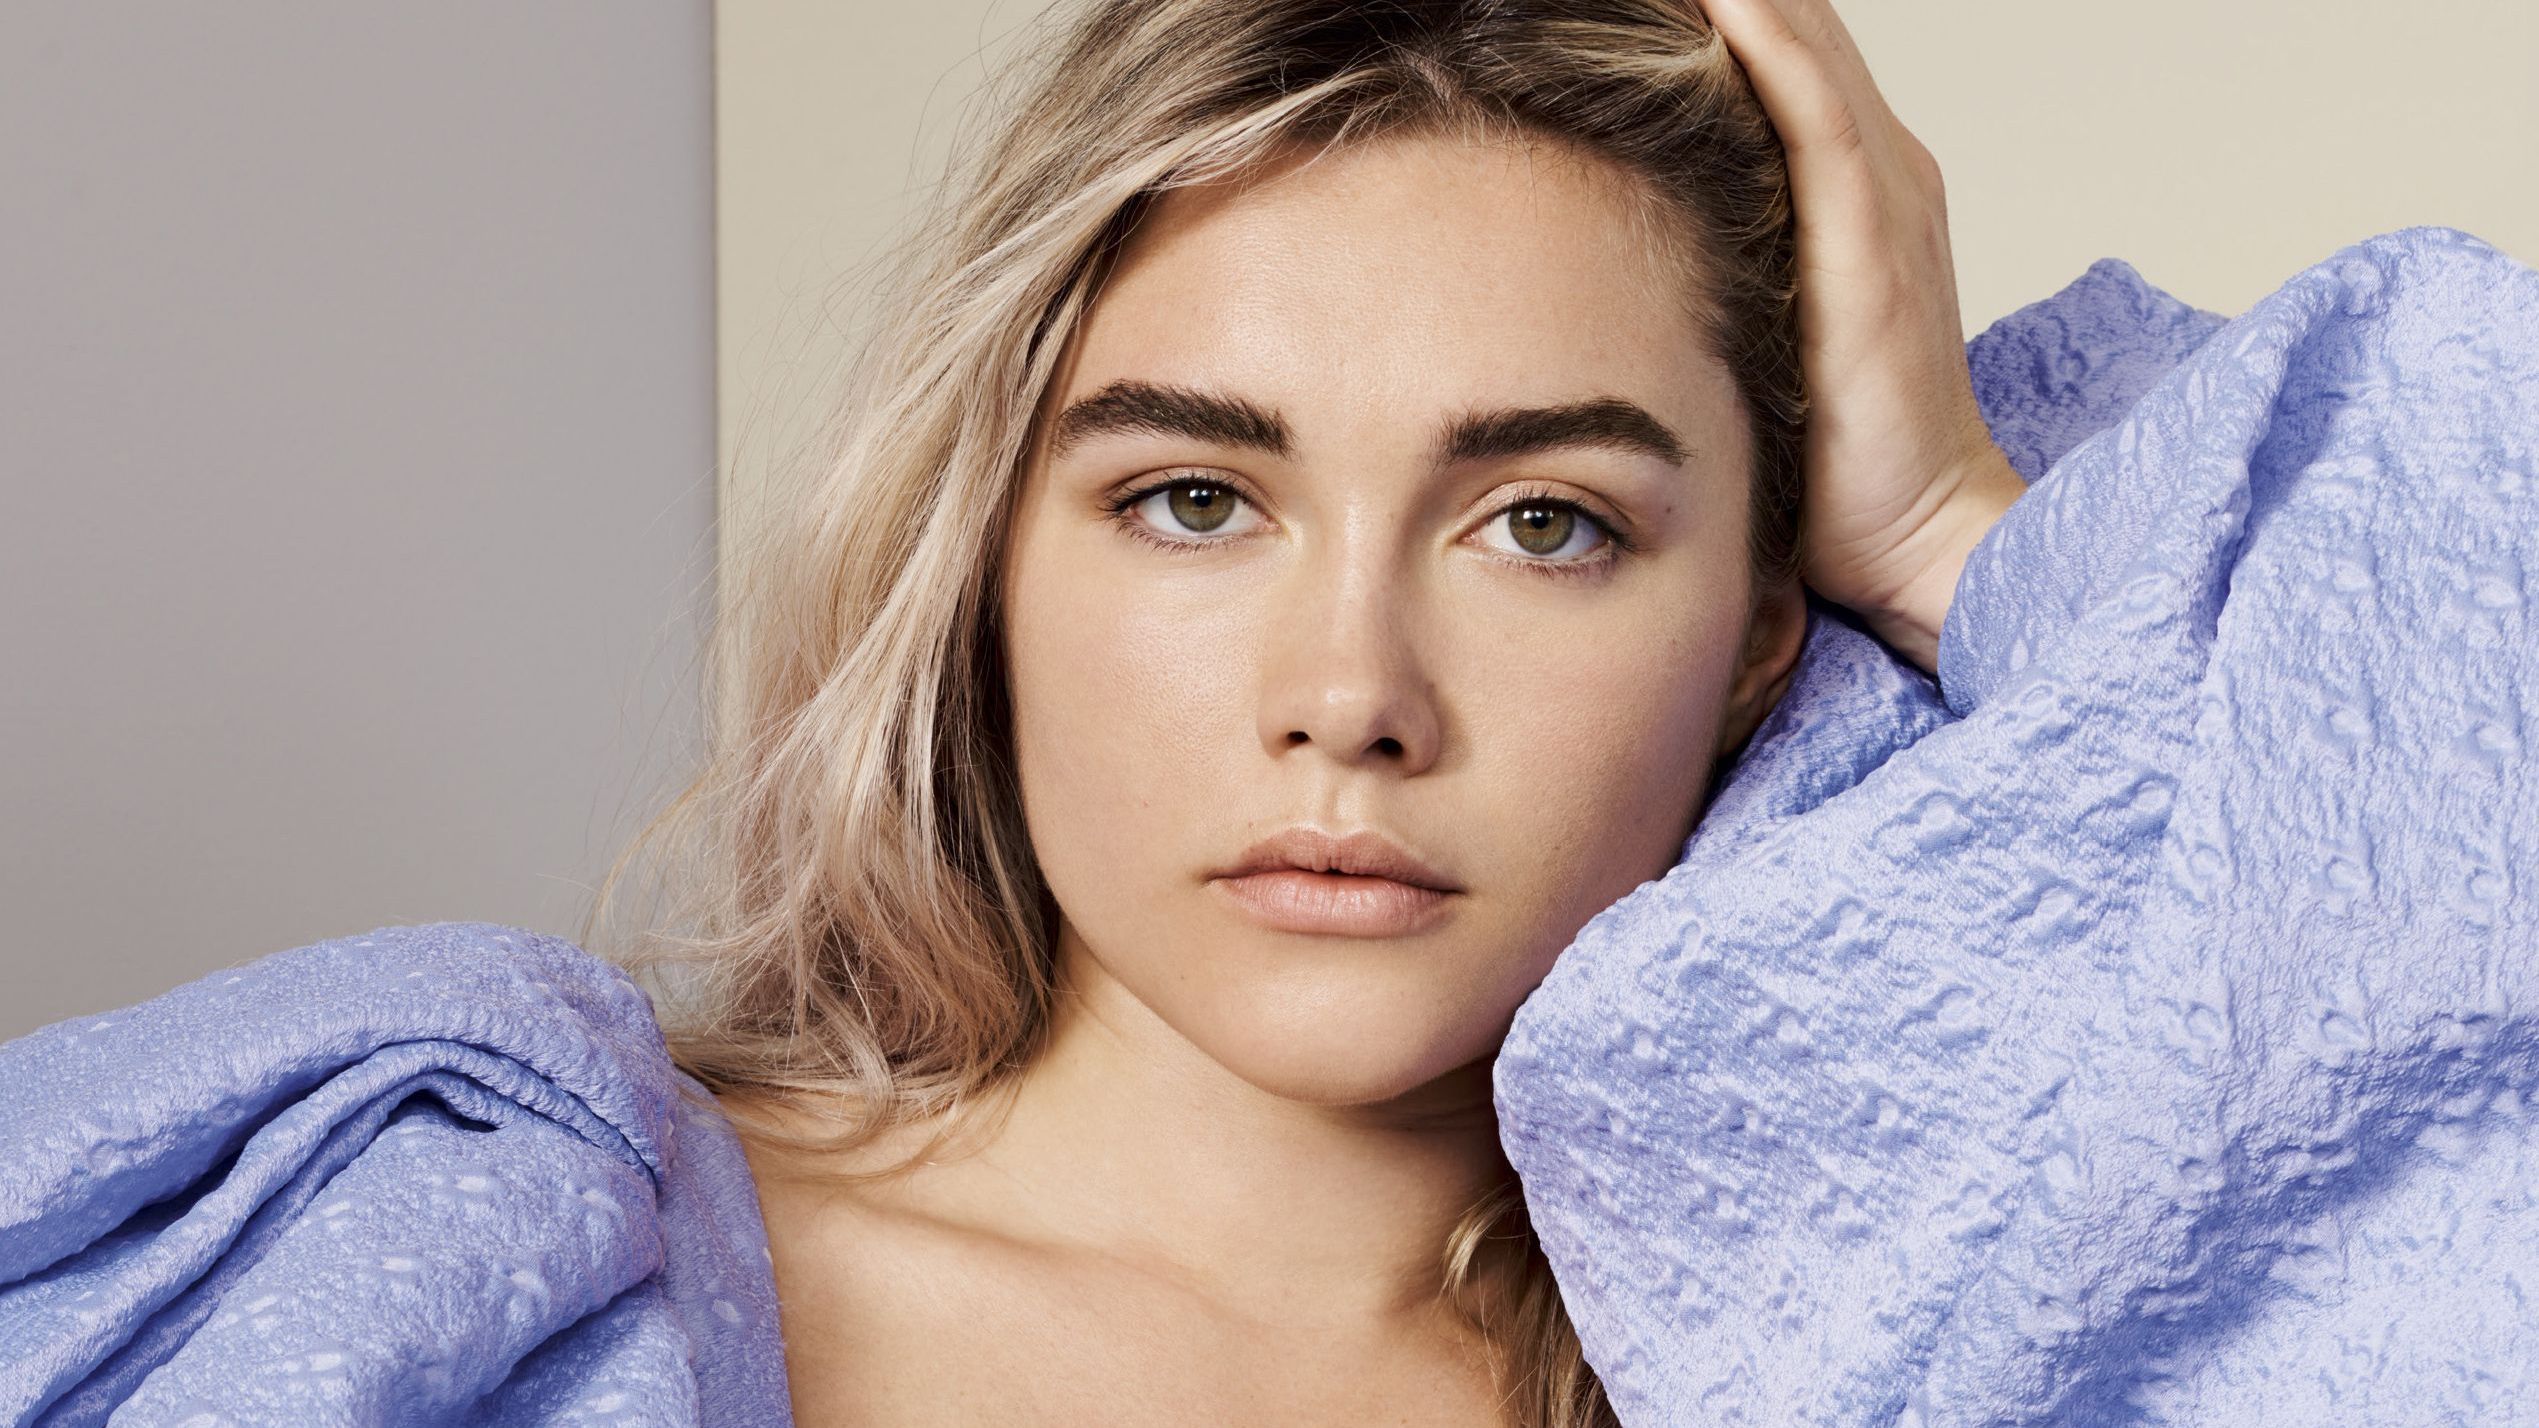 Mobile wallpaper: Blonde, English, Face, Celebrity, Actress, Florence Pugh, 982833 download the picture for free